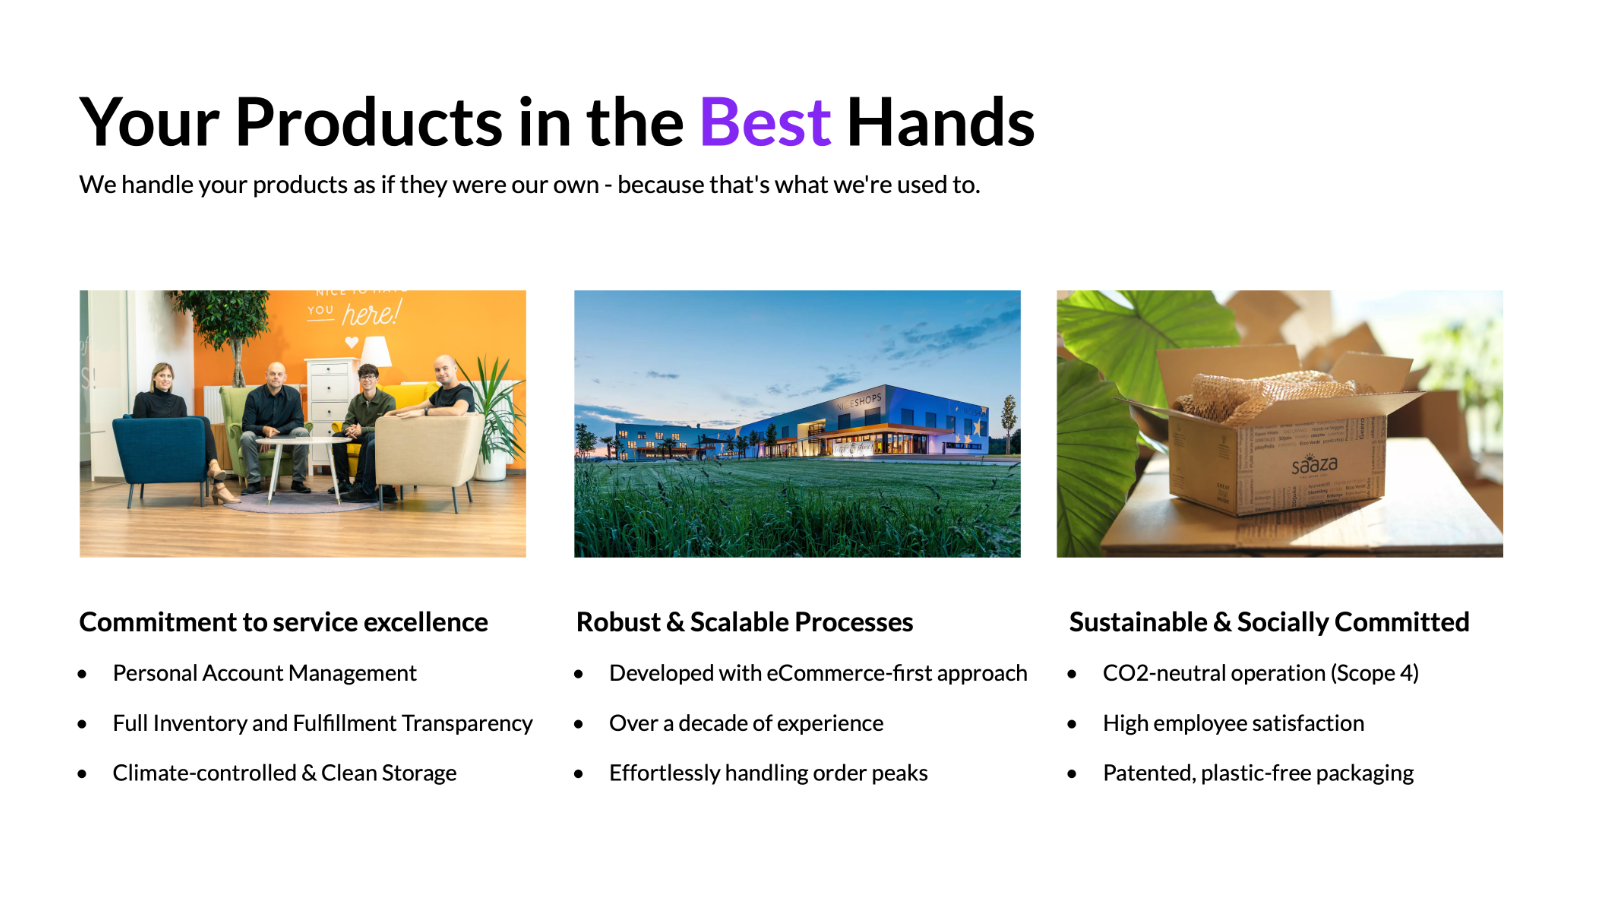 Your products in the best hands